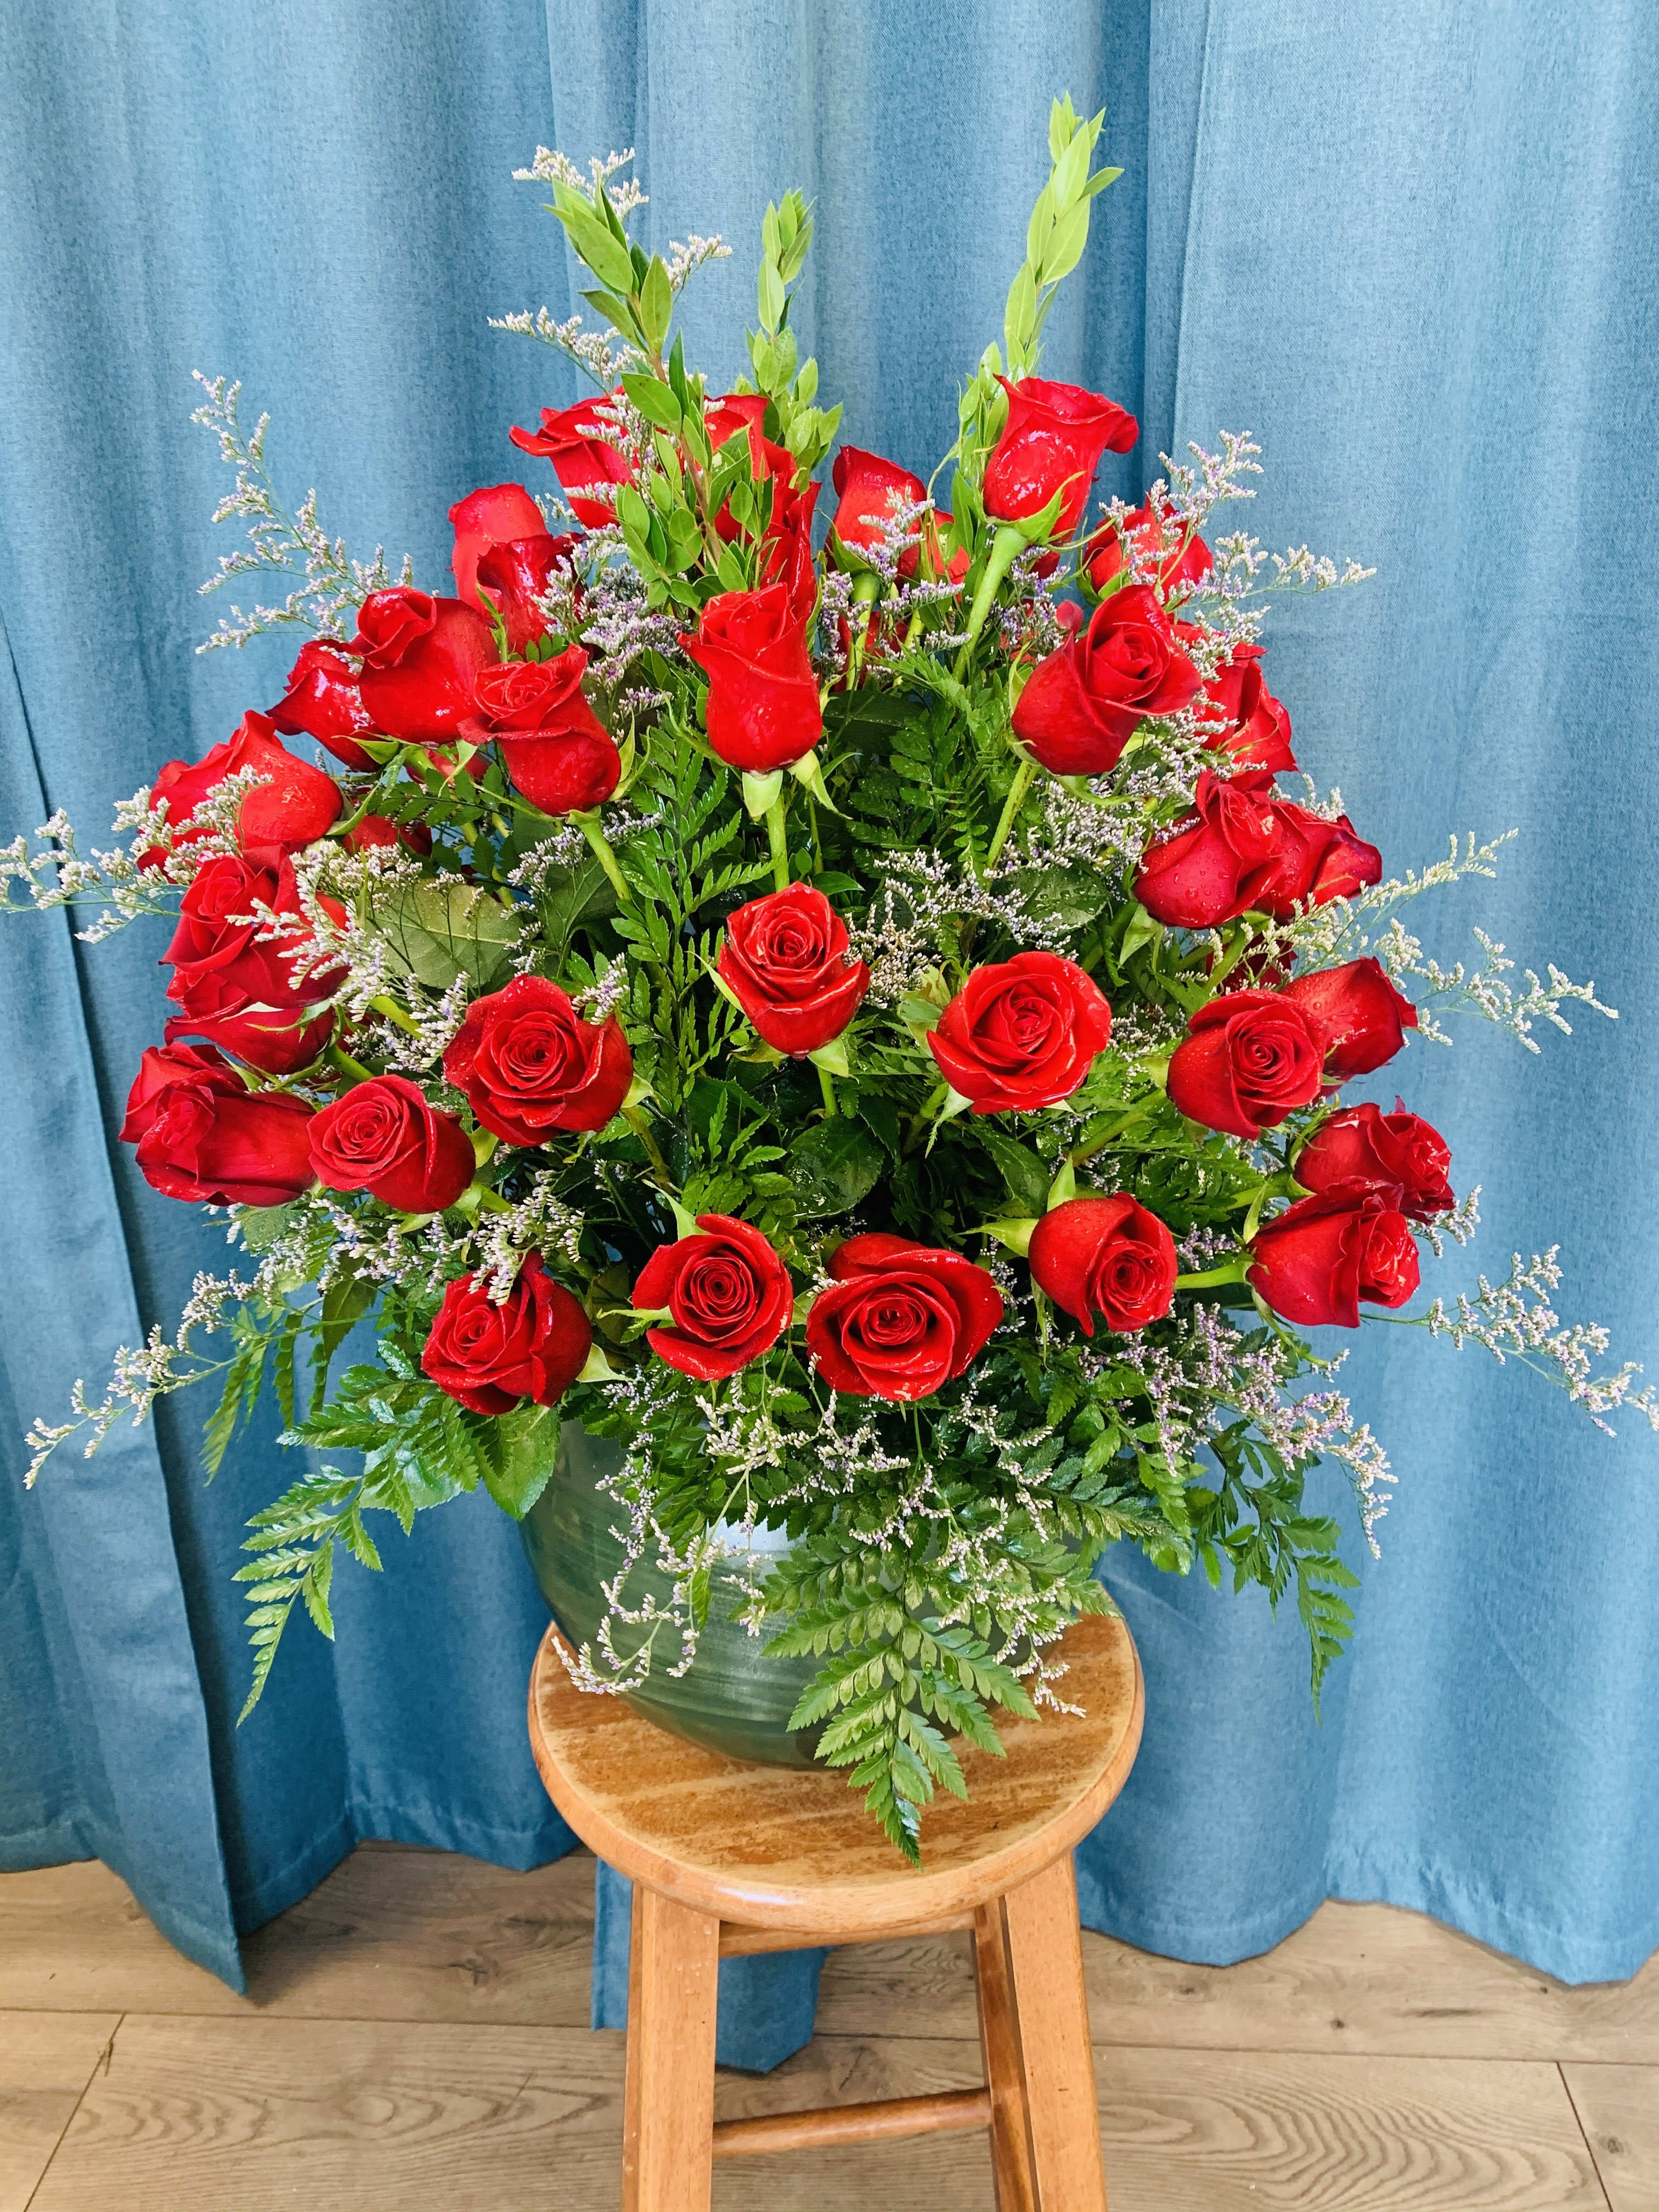 Will you love and need me at 64? (Beatles) - 64 roses in a stunning bouquet with greenery and  soft caspia